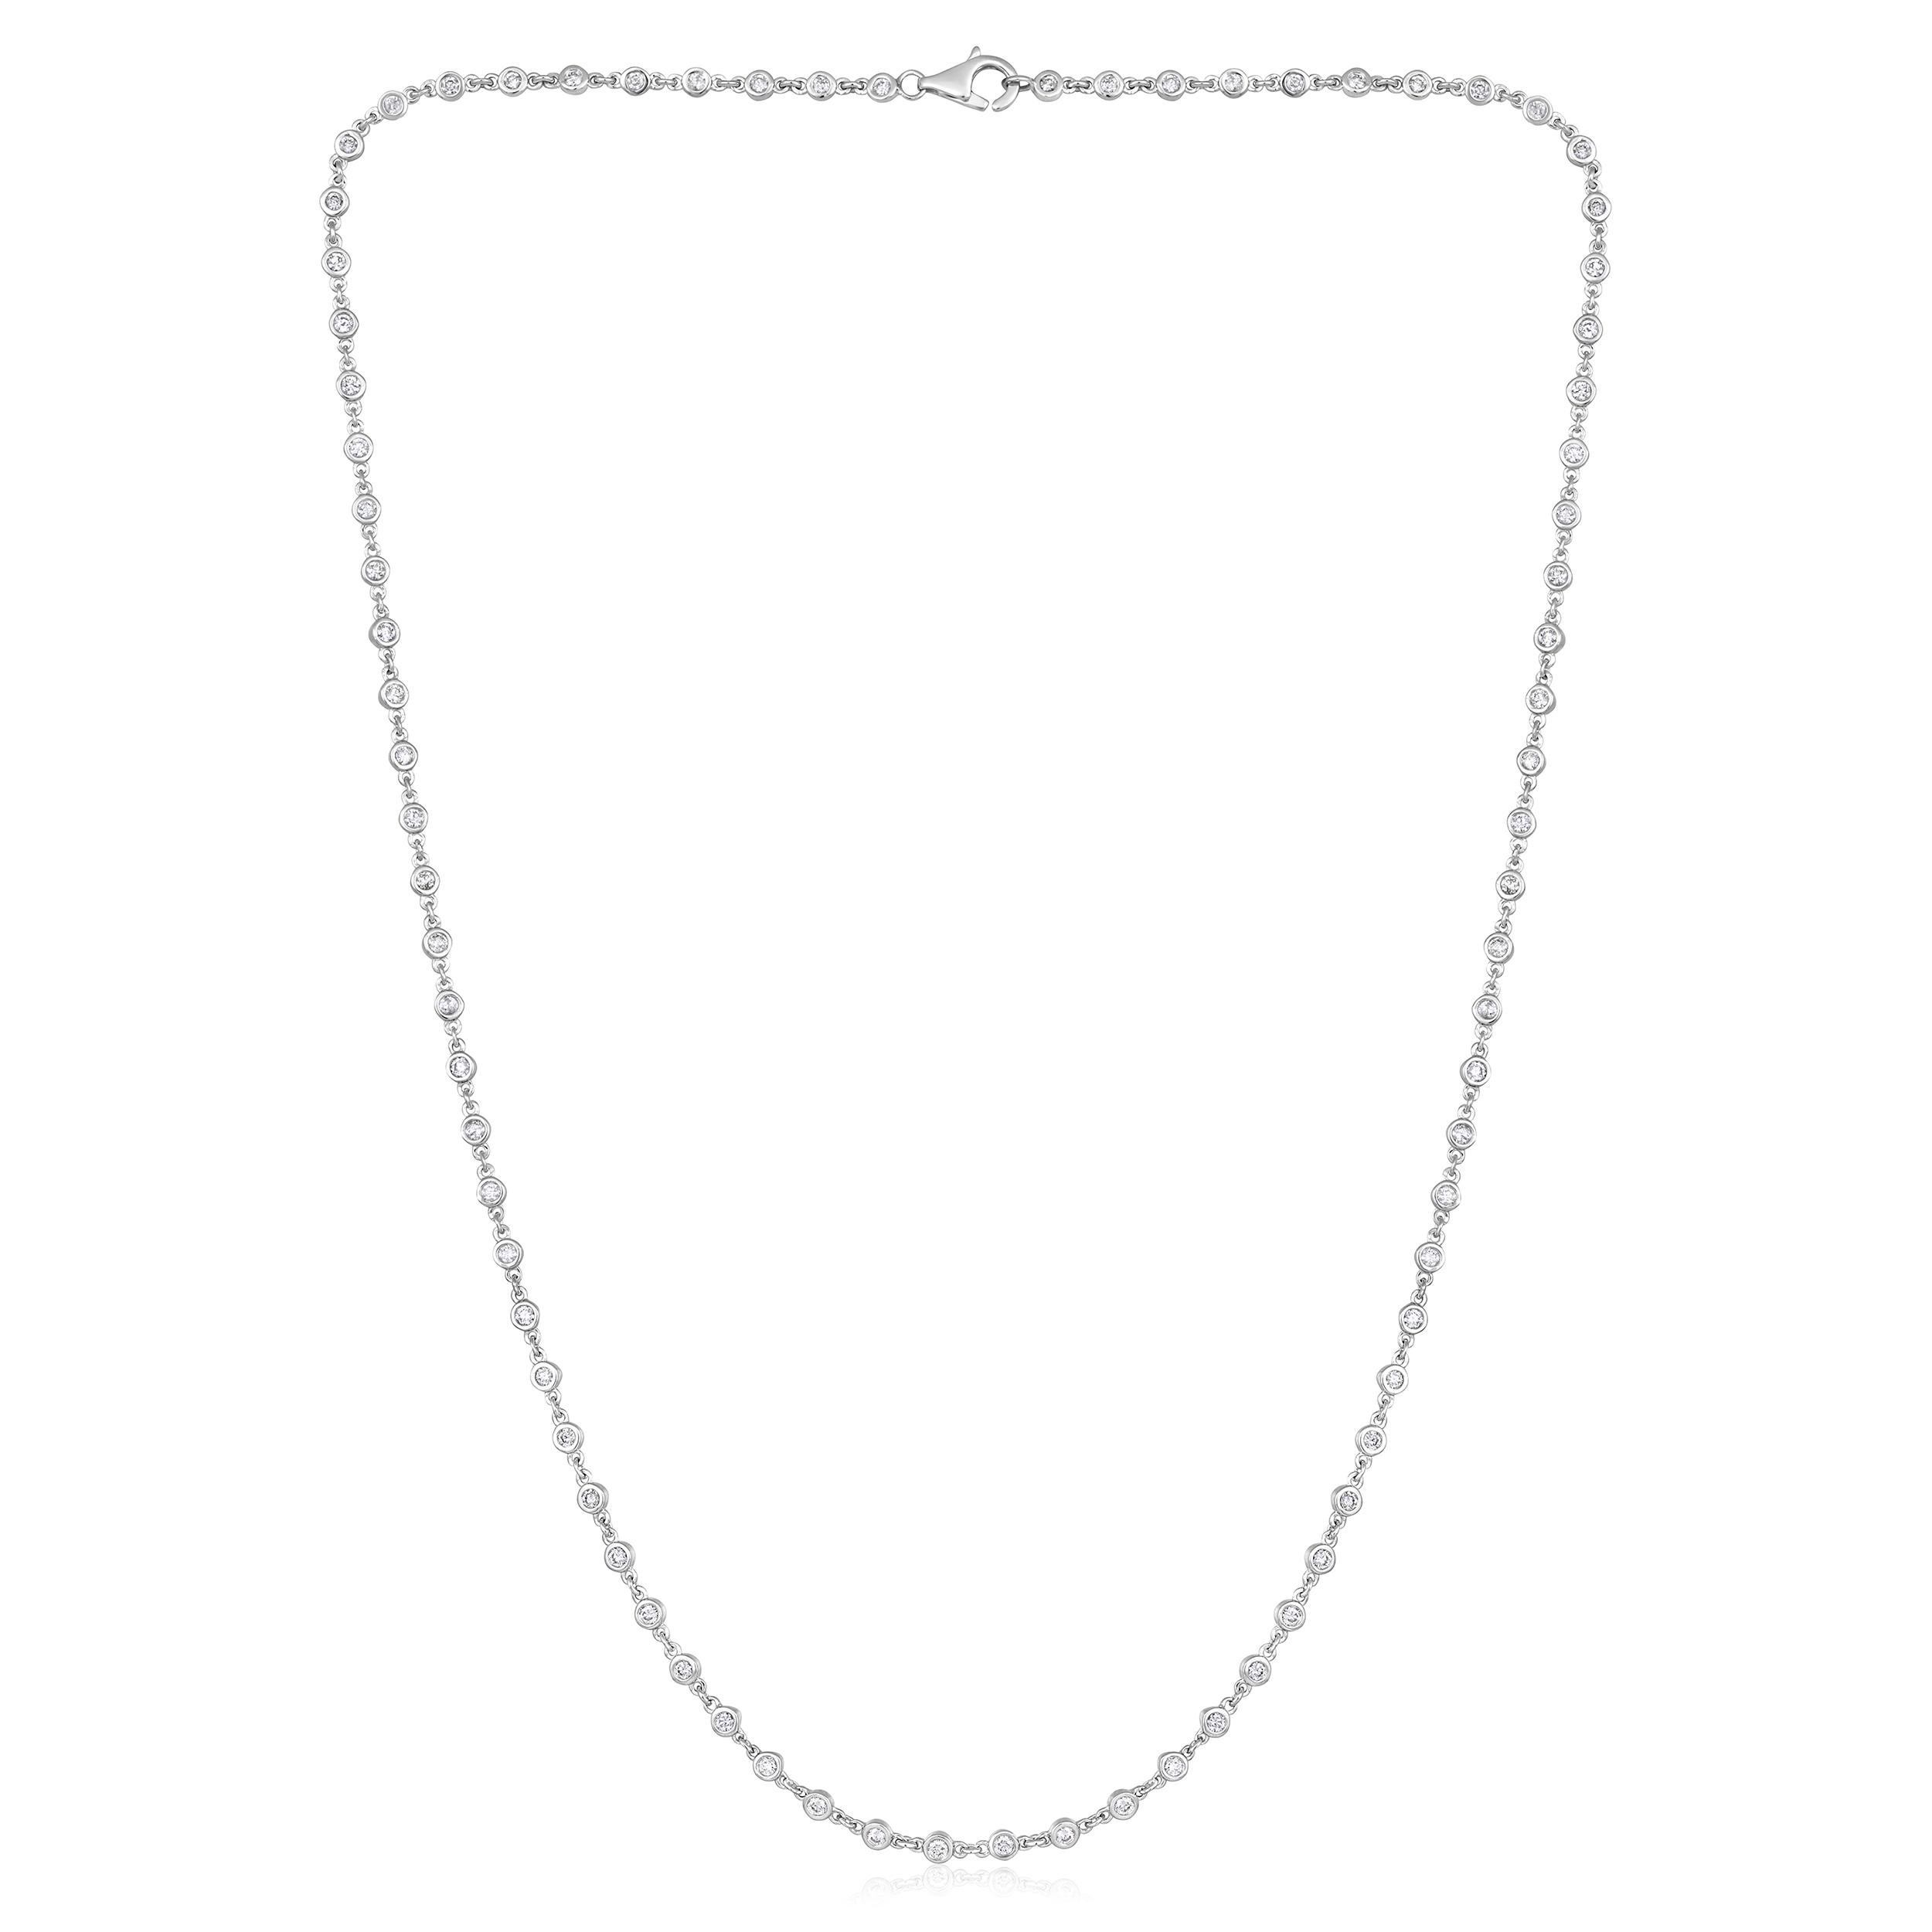 Crafted in 8.74 grams of 18K White Gold, the necklace contains 83 stones of Round Natural Diamonds with a total of 1.65 carat in G-H color and VS-SI clarity. The necklace length is 18 inches.
CONTEMPORARY AND TIMELESS ESSENCE: Crafted in